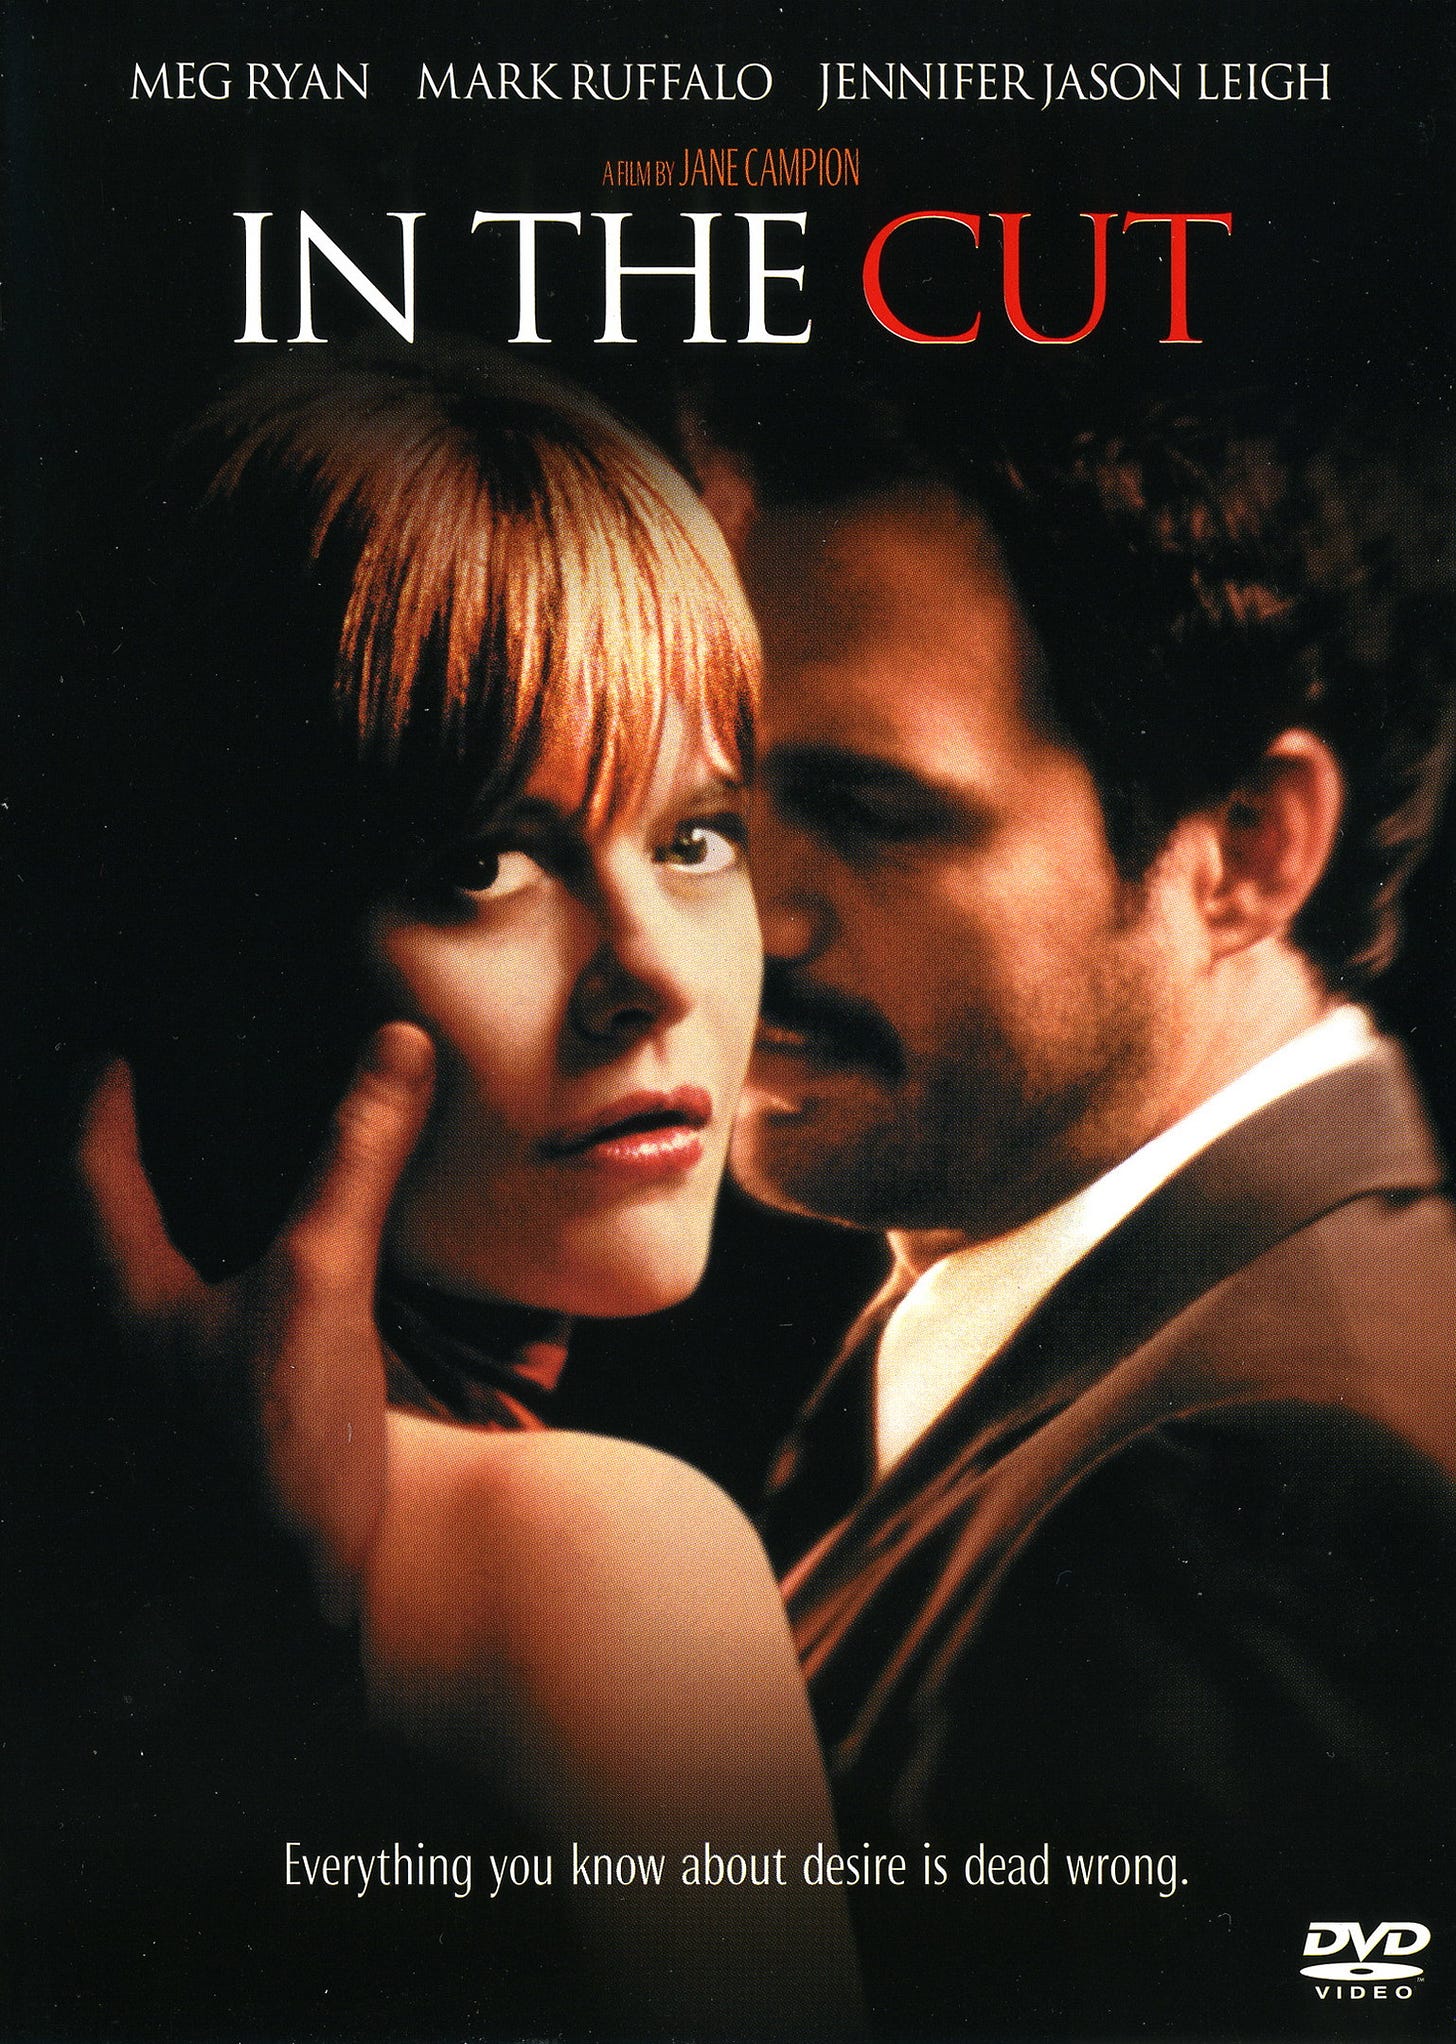 The poster for In the Cut, showing Ryan looking at us out of the poster while Ruffalo holds her face and tries to turn her back towards him